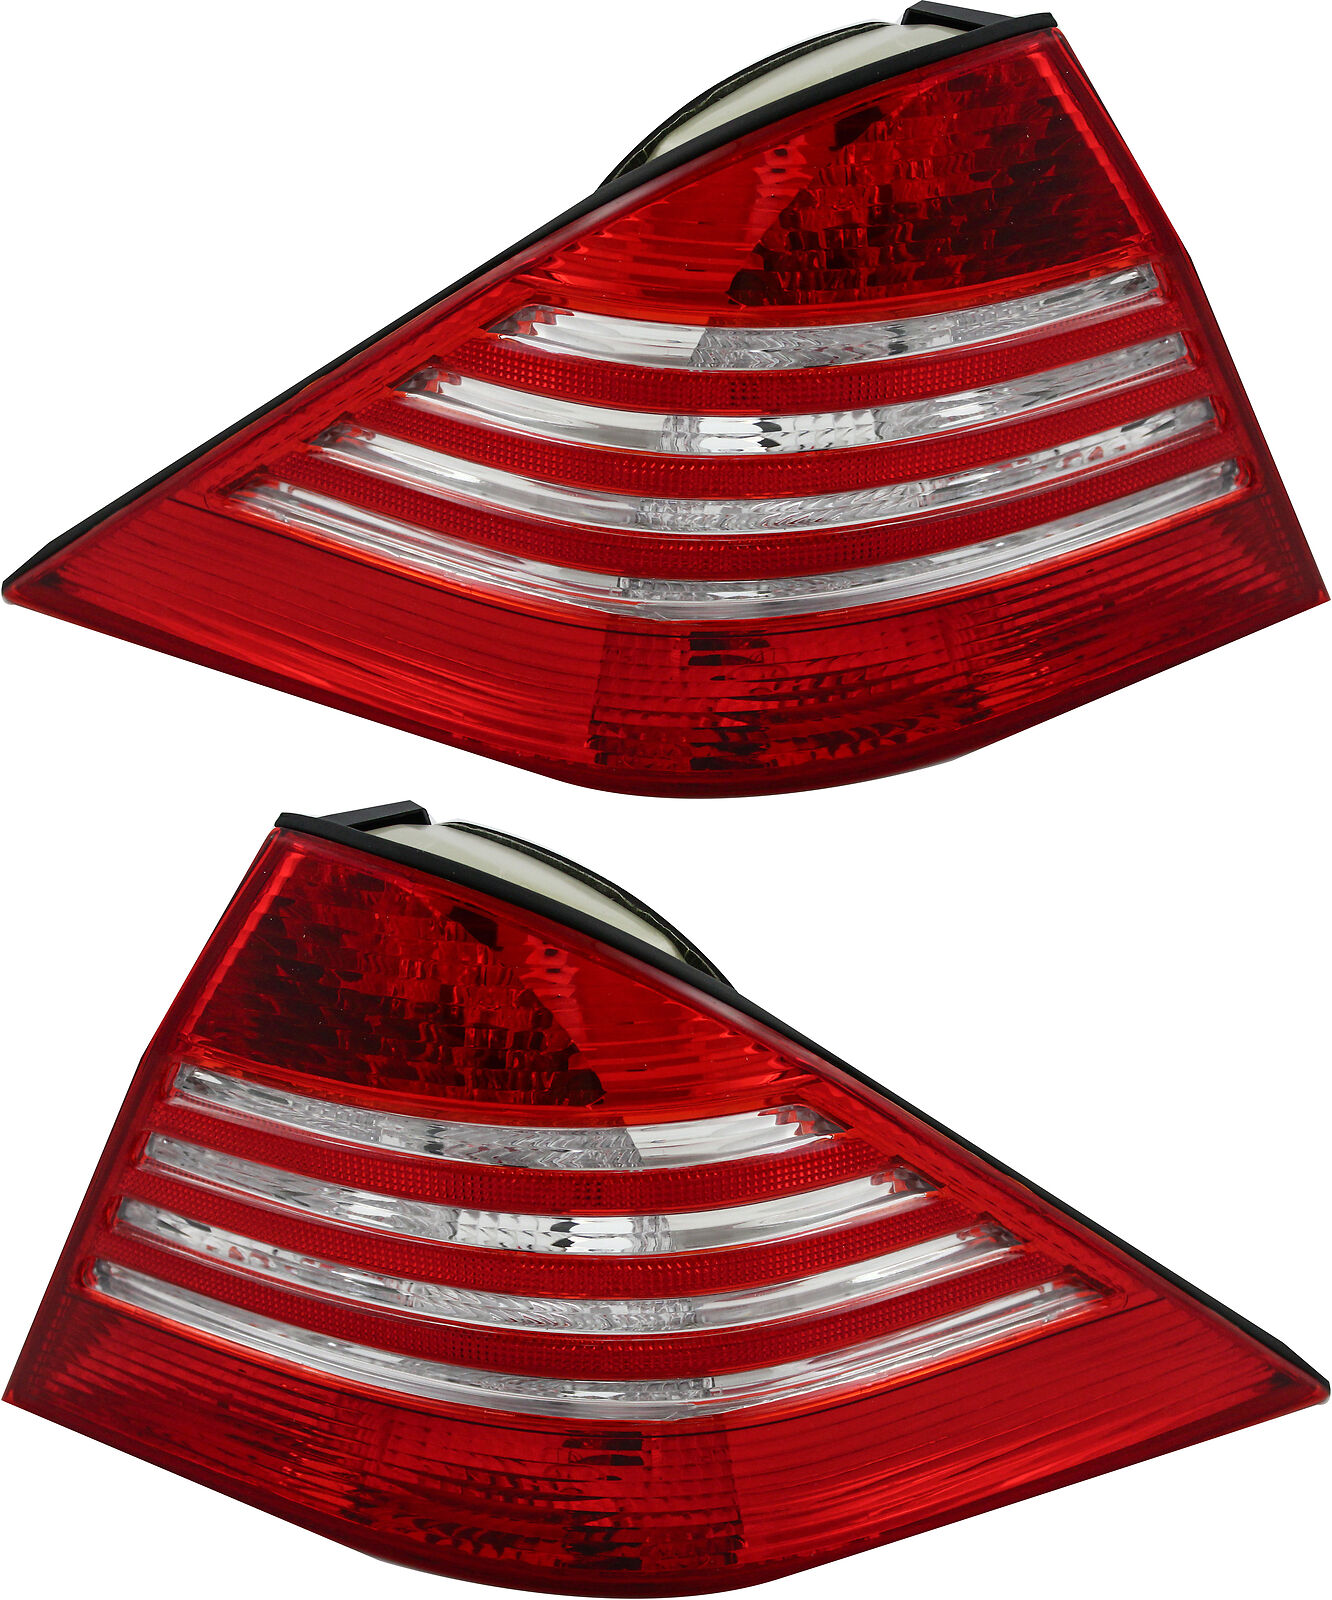 For 2003-2006 Mercedes Benz S Class Tail Light Set Driver and Passenger Side